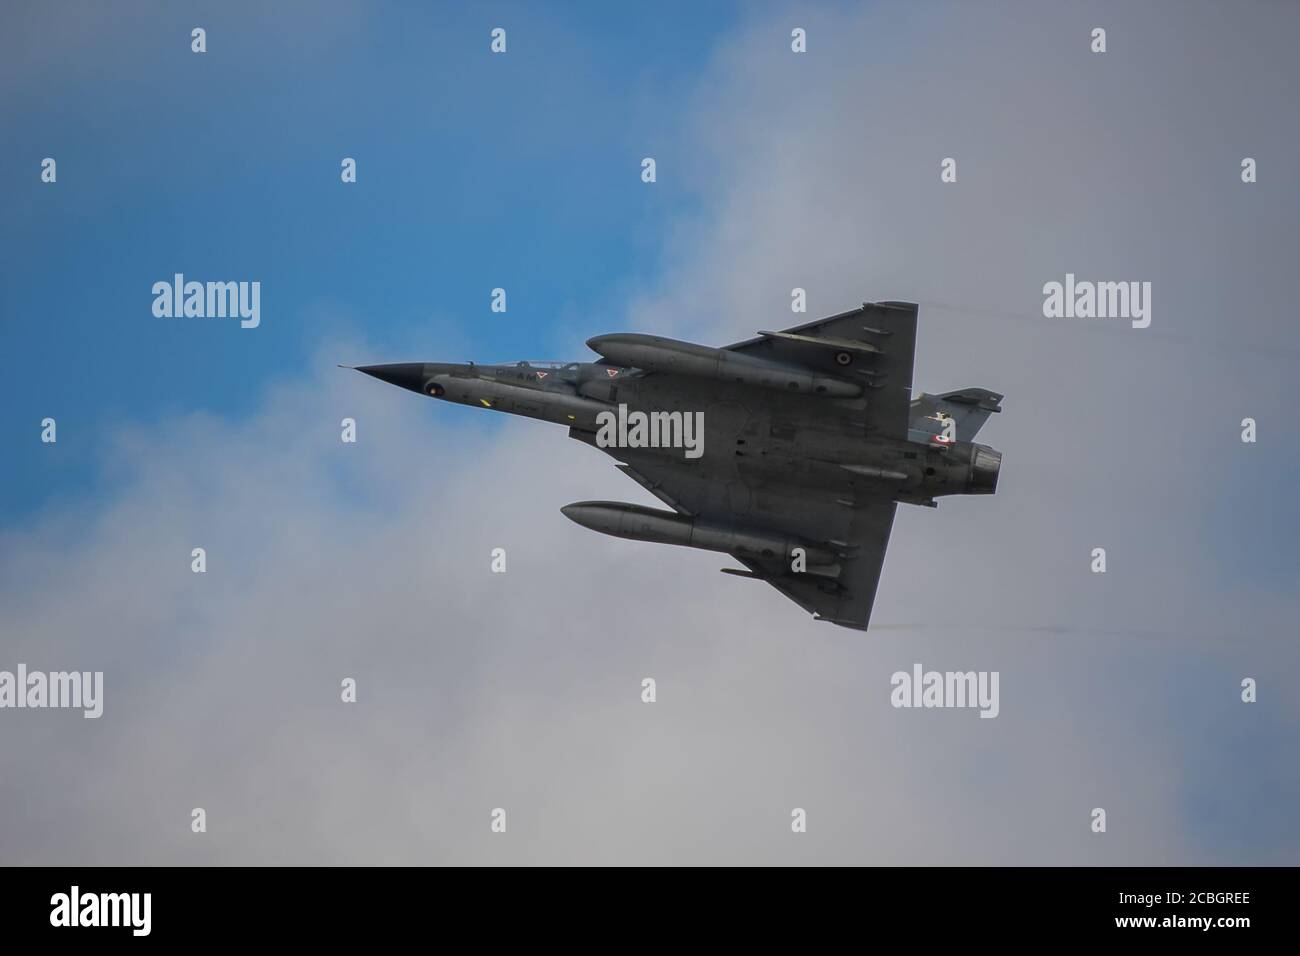 A French Dassault Mirage 2000N nuclear strike aircraft Stock Photo